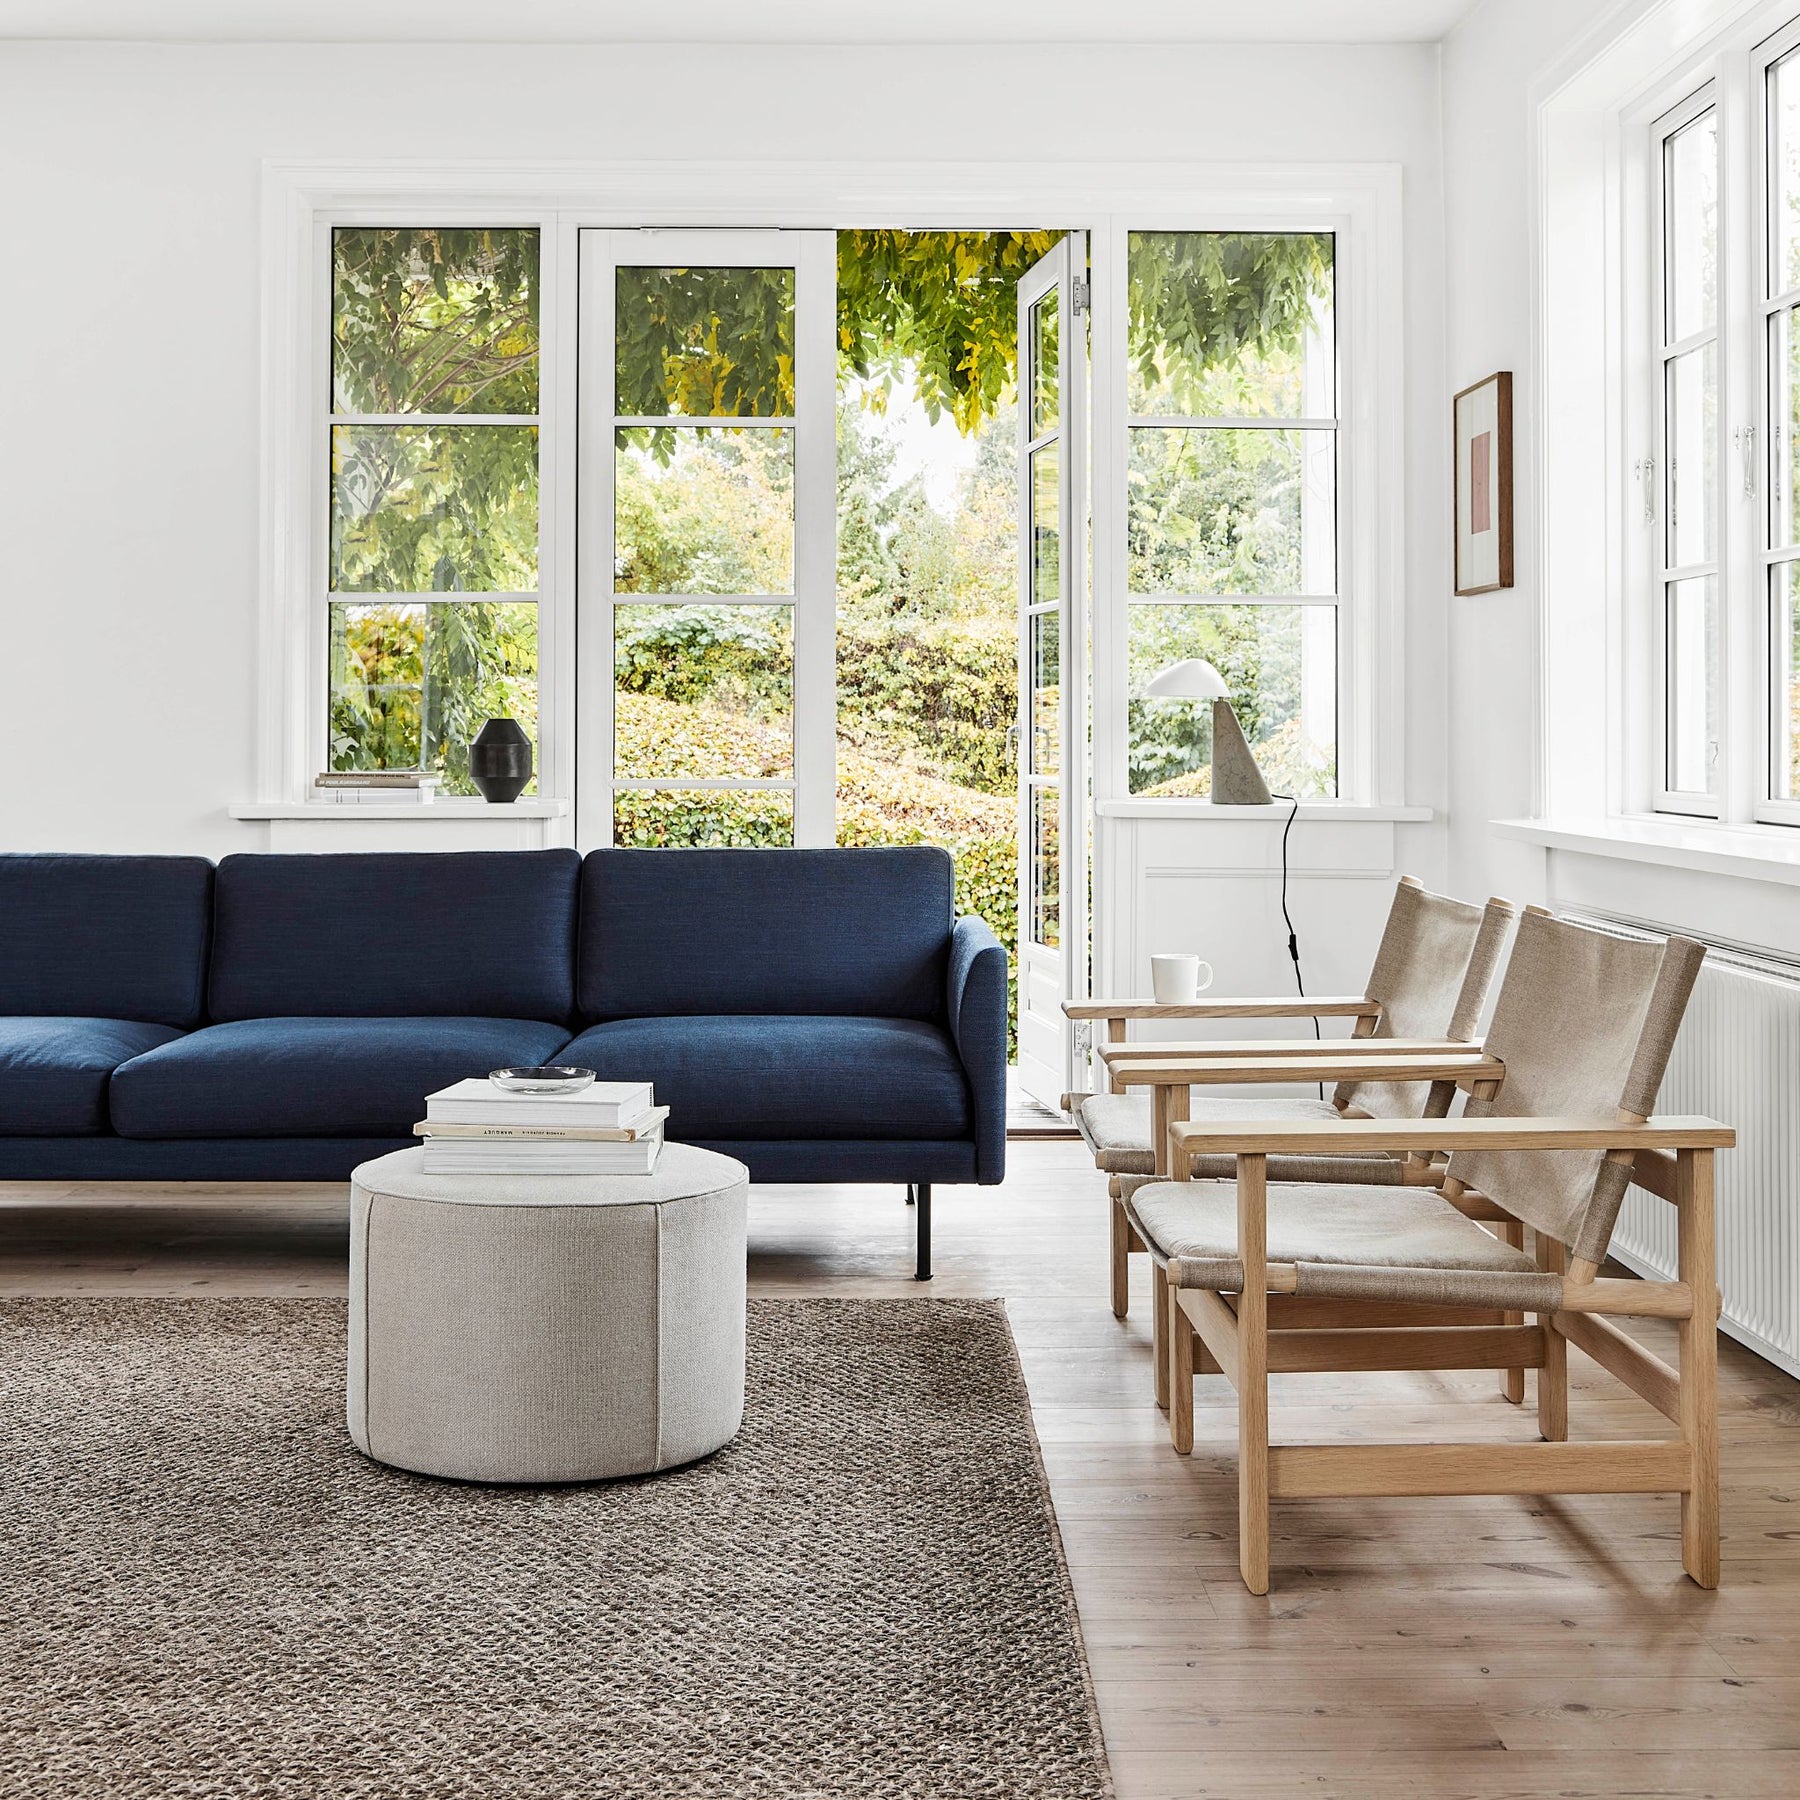 Fredericia Furniture Calmo Sofa and Canvas Chairs at Palette and Parlor